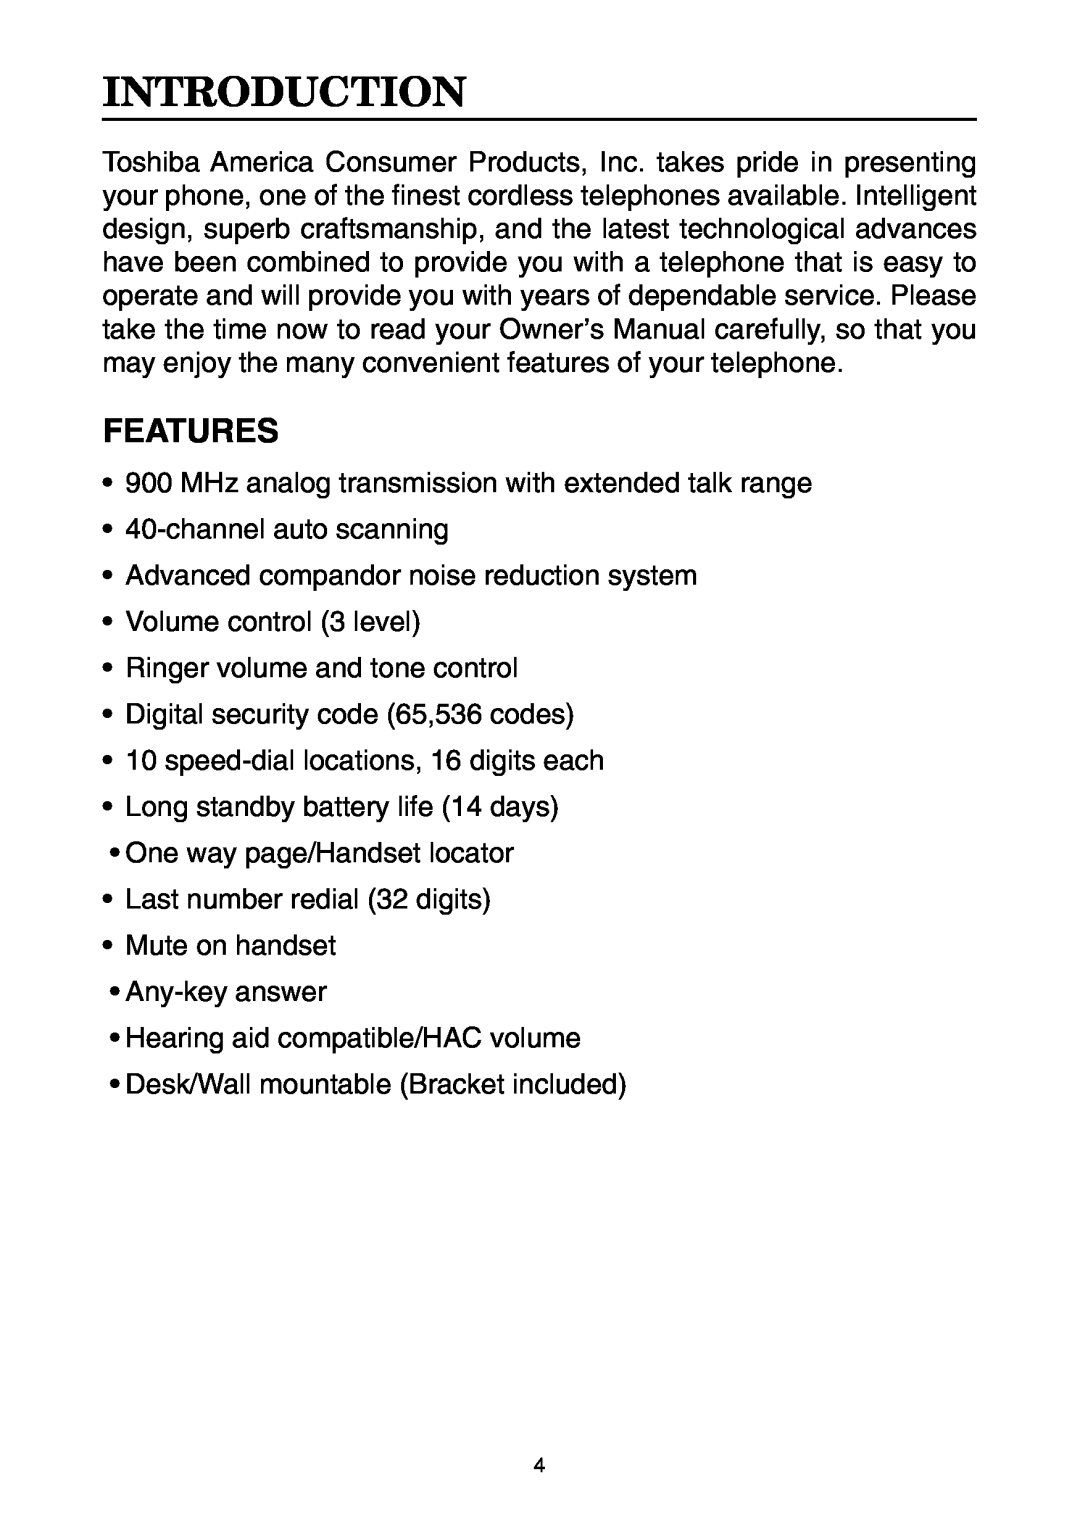 Toshiba FT-8001 AW manual Introduction, Features 